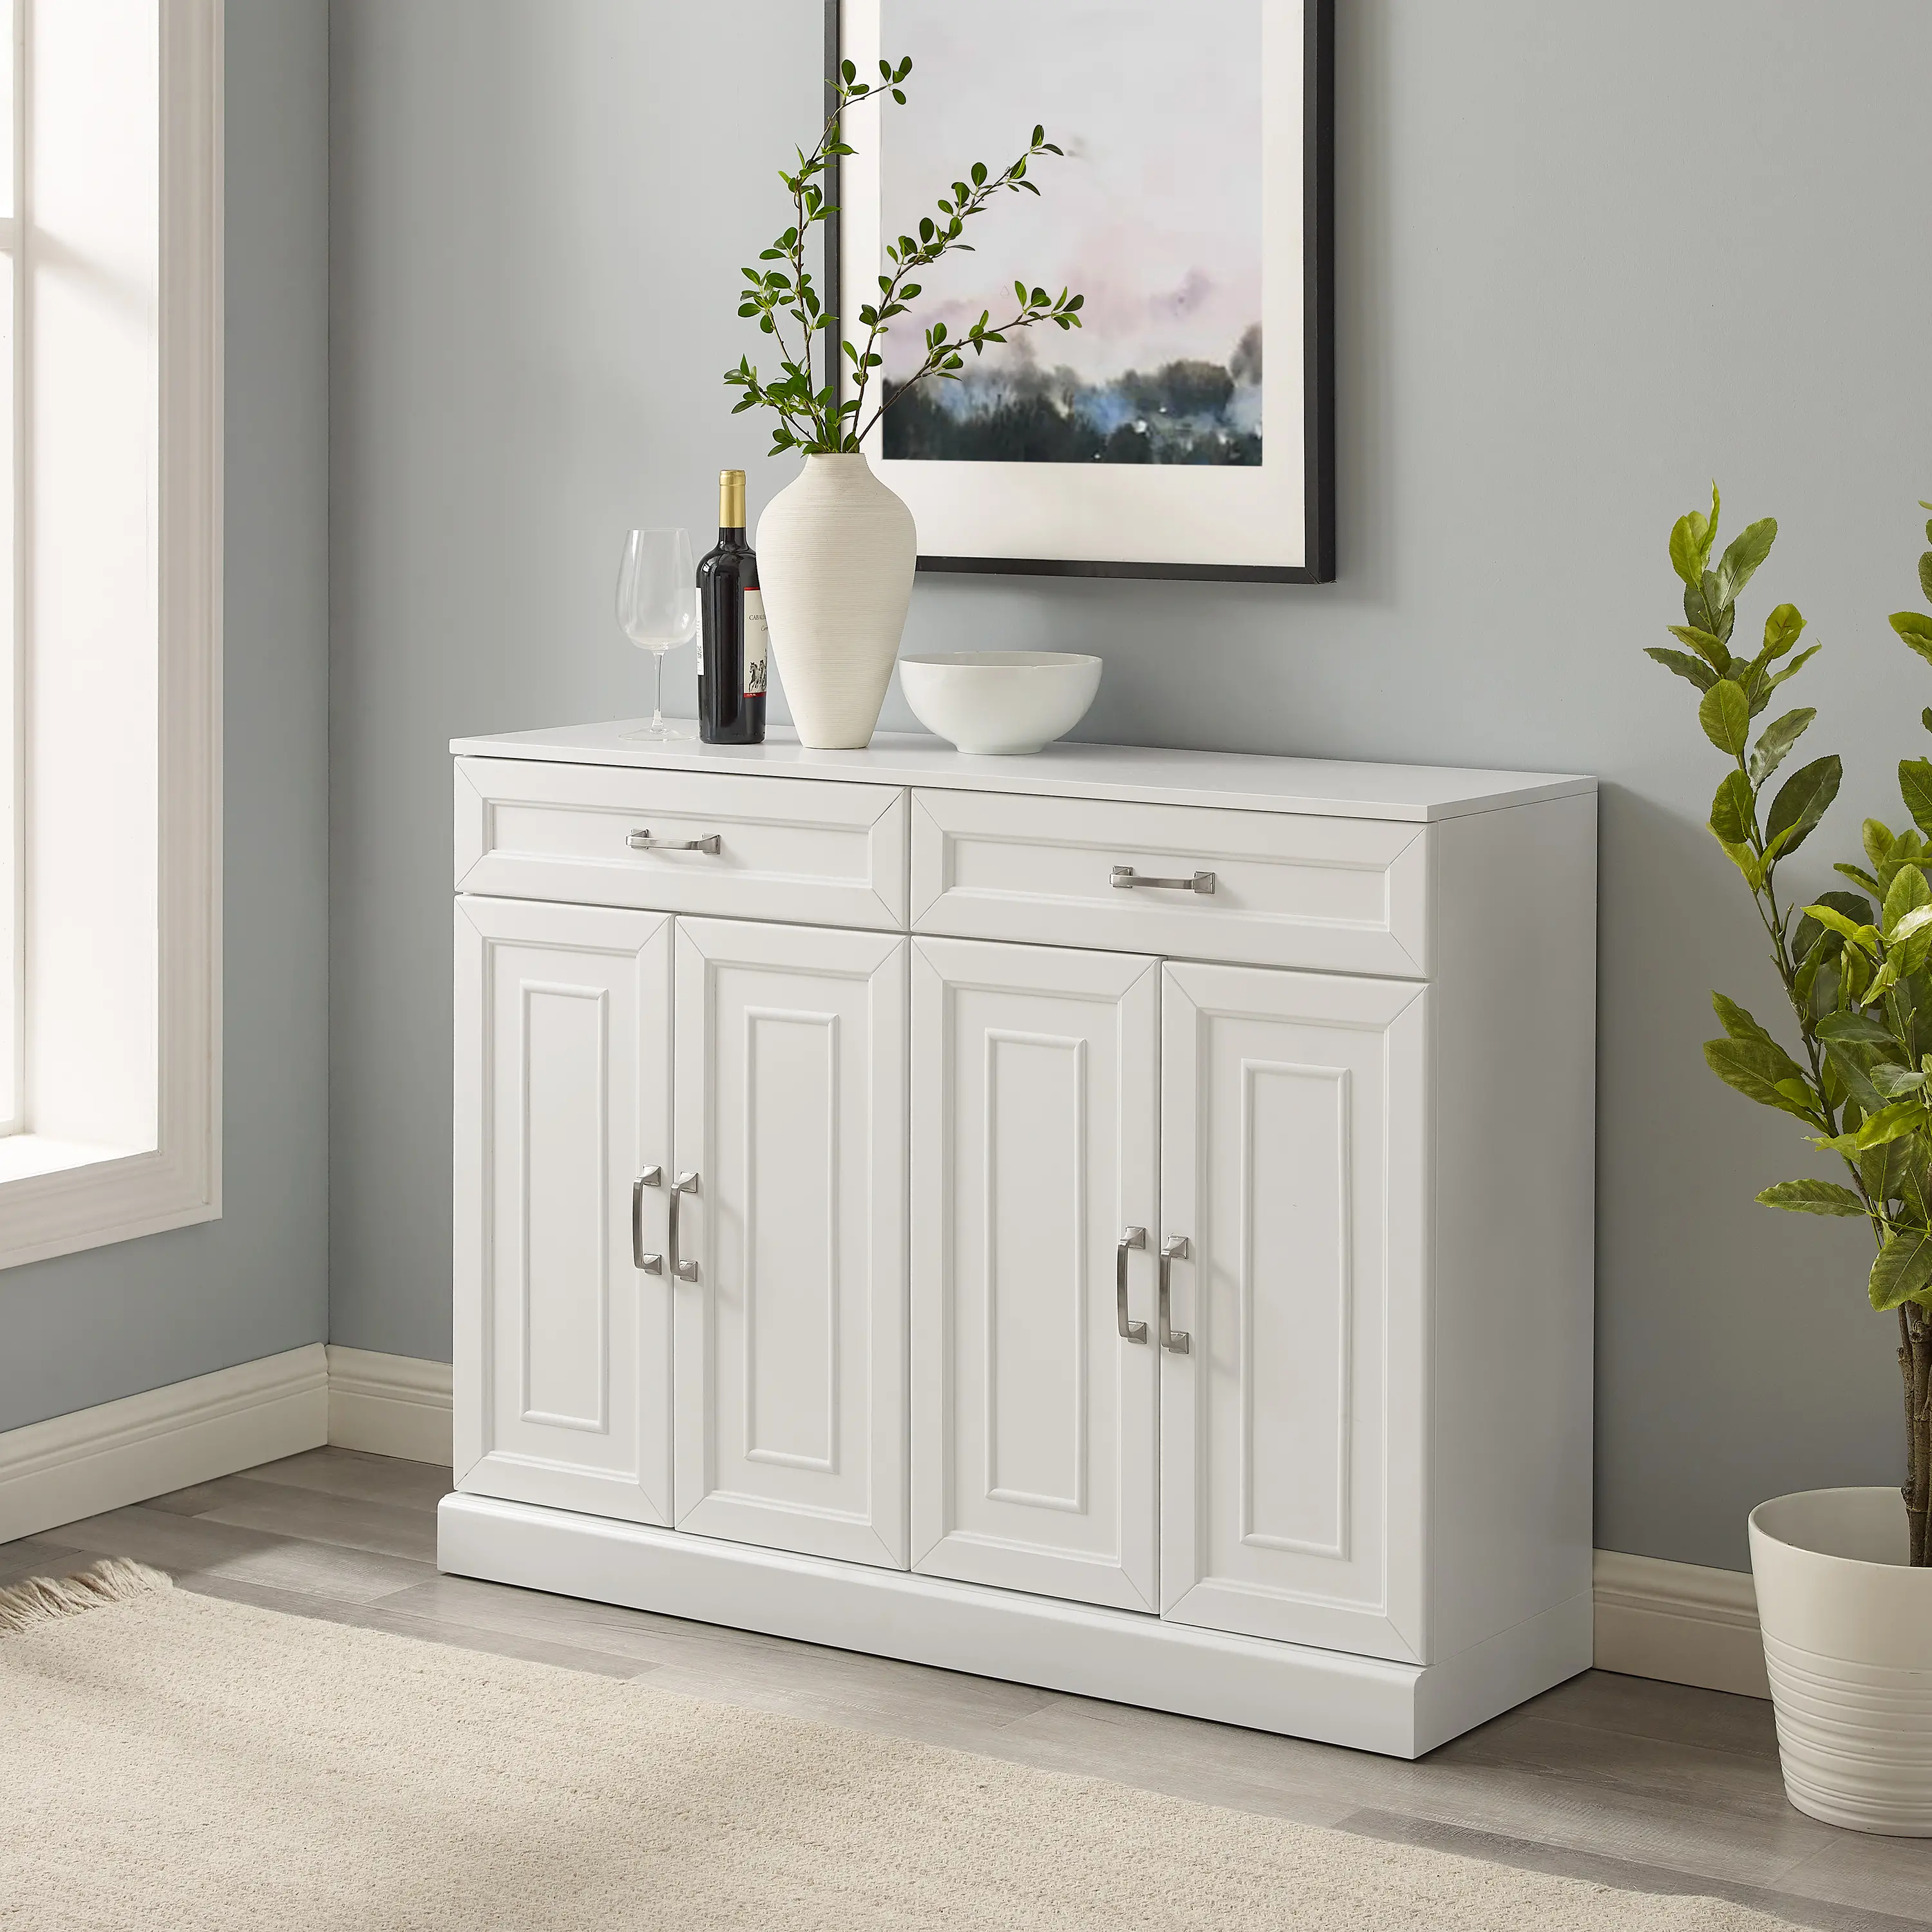 CF4213-WH Stanton White Dining Room Sideboard sku CF4213-WH